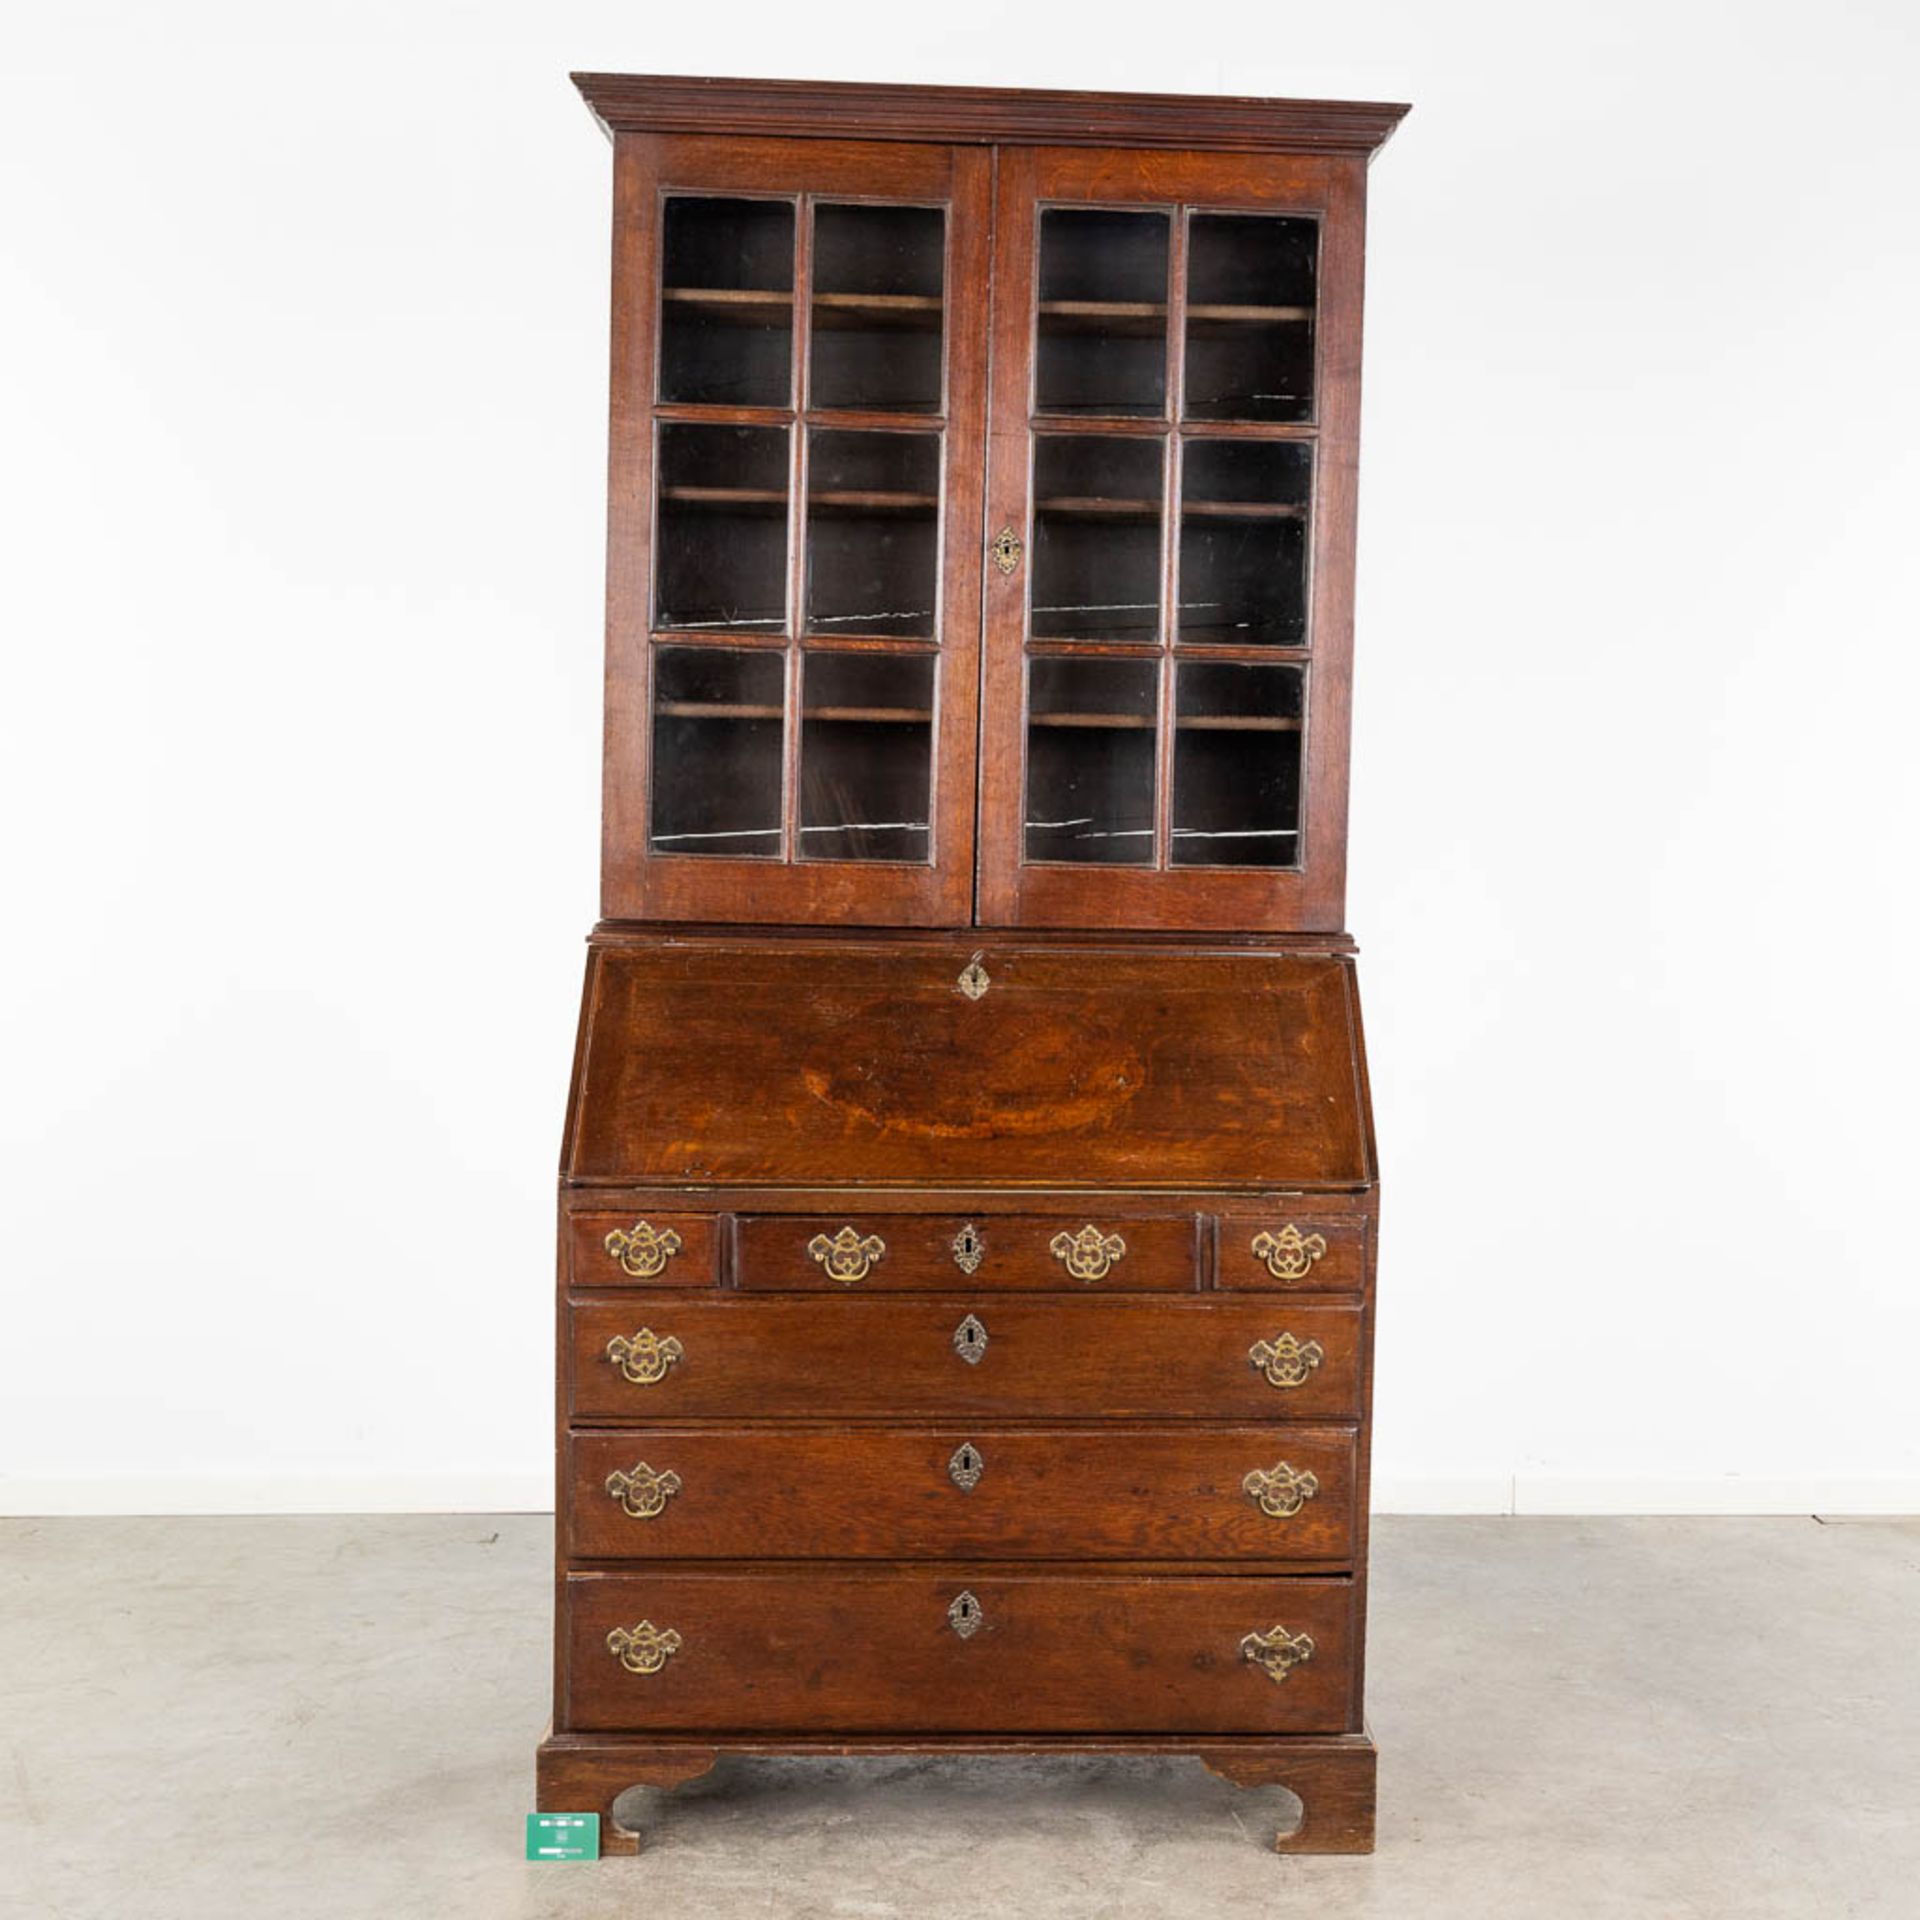 A secretaire with a display cabinet/library, oak, 19th C. (L: 98 x W: 57 x H: 212 cm) - Image 2 of 14